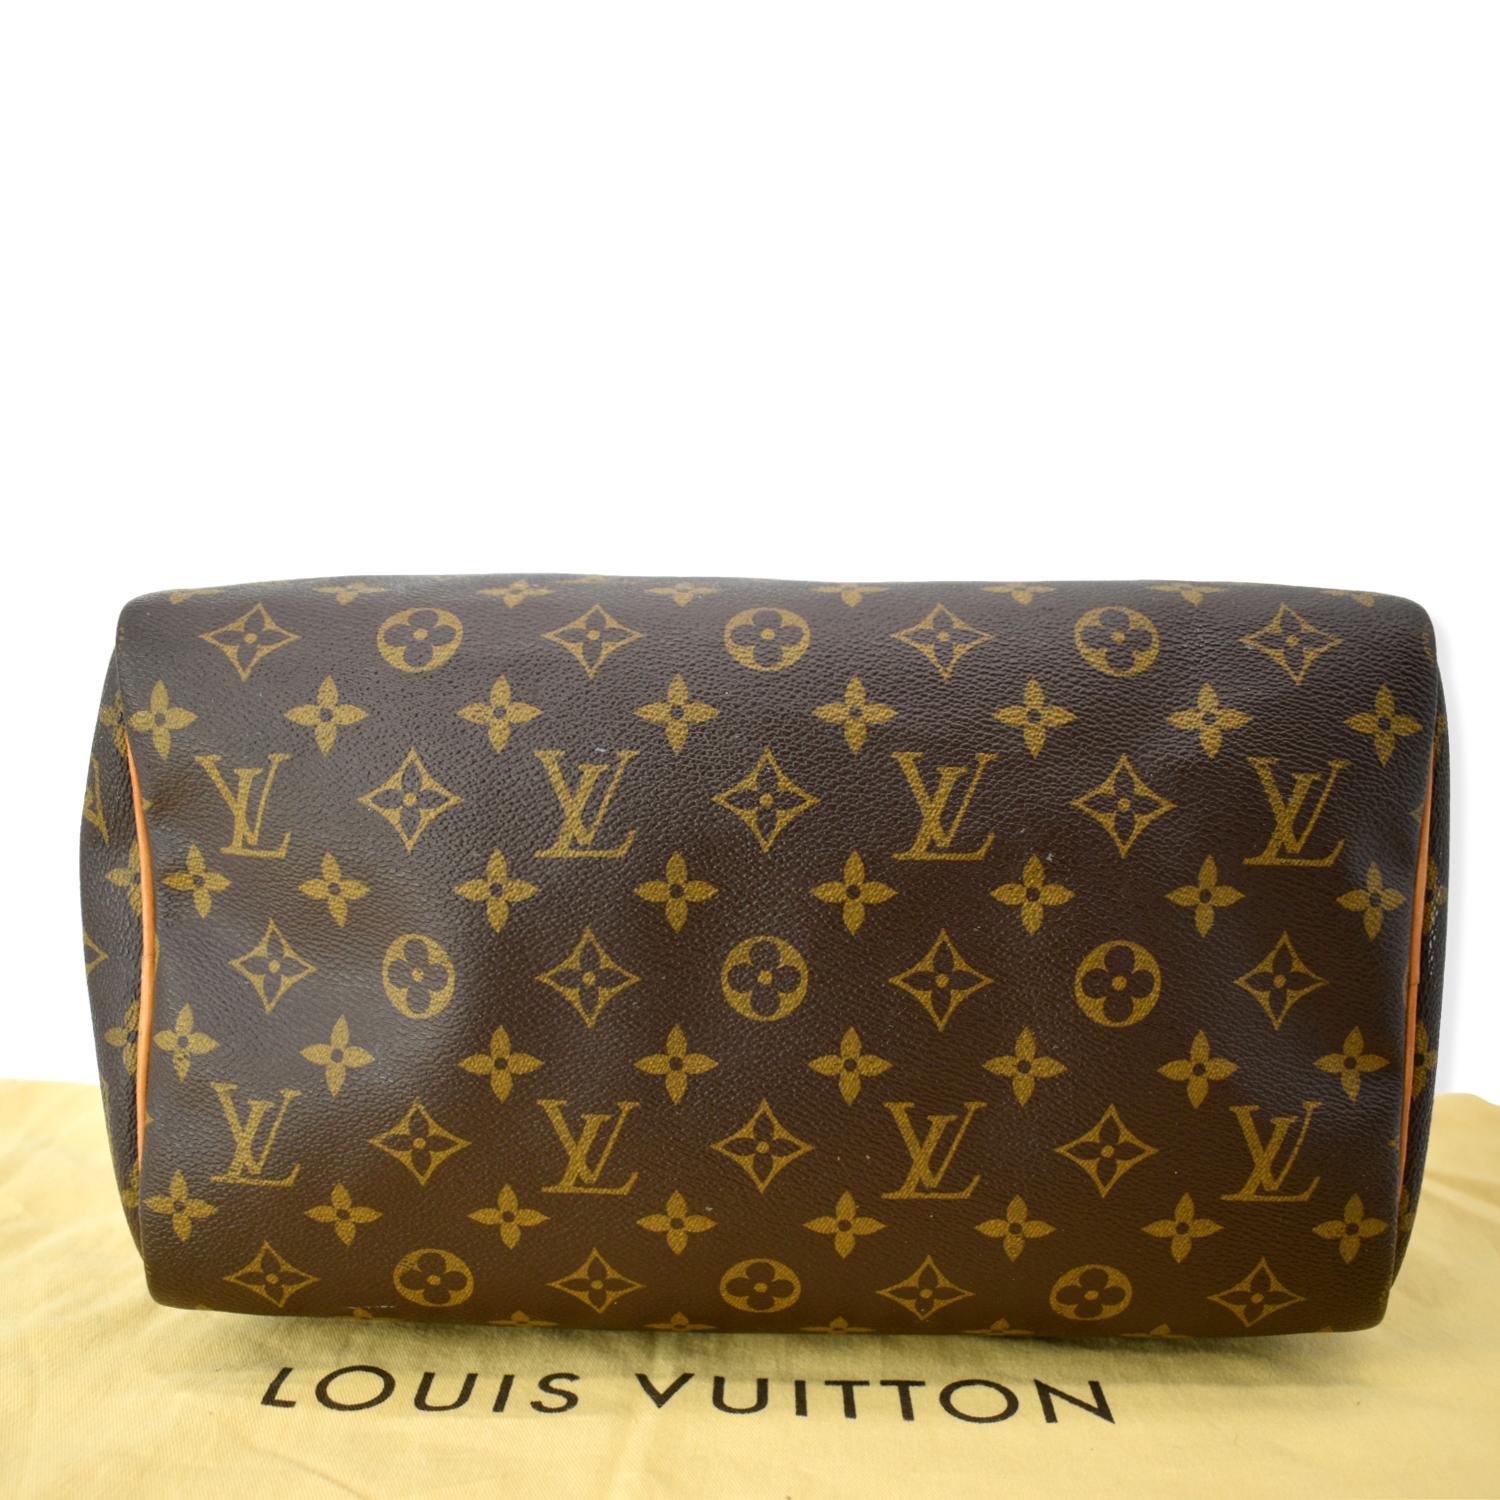 Authentic Louis Vuitton Extra Large Envelope Style Dust Bag 30.5” X 21  inches